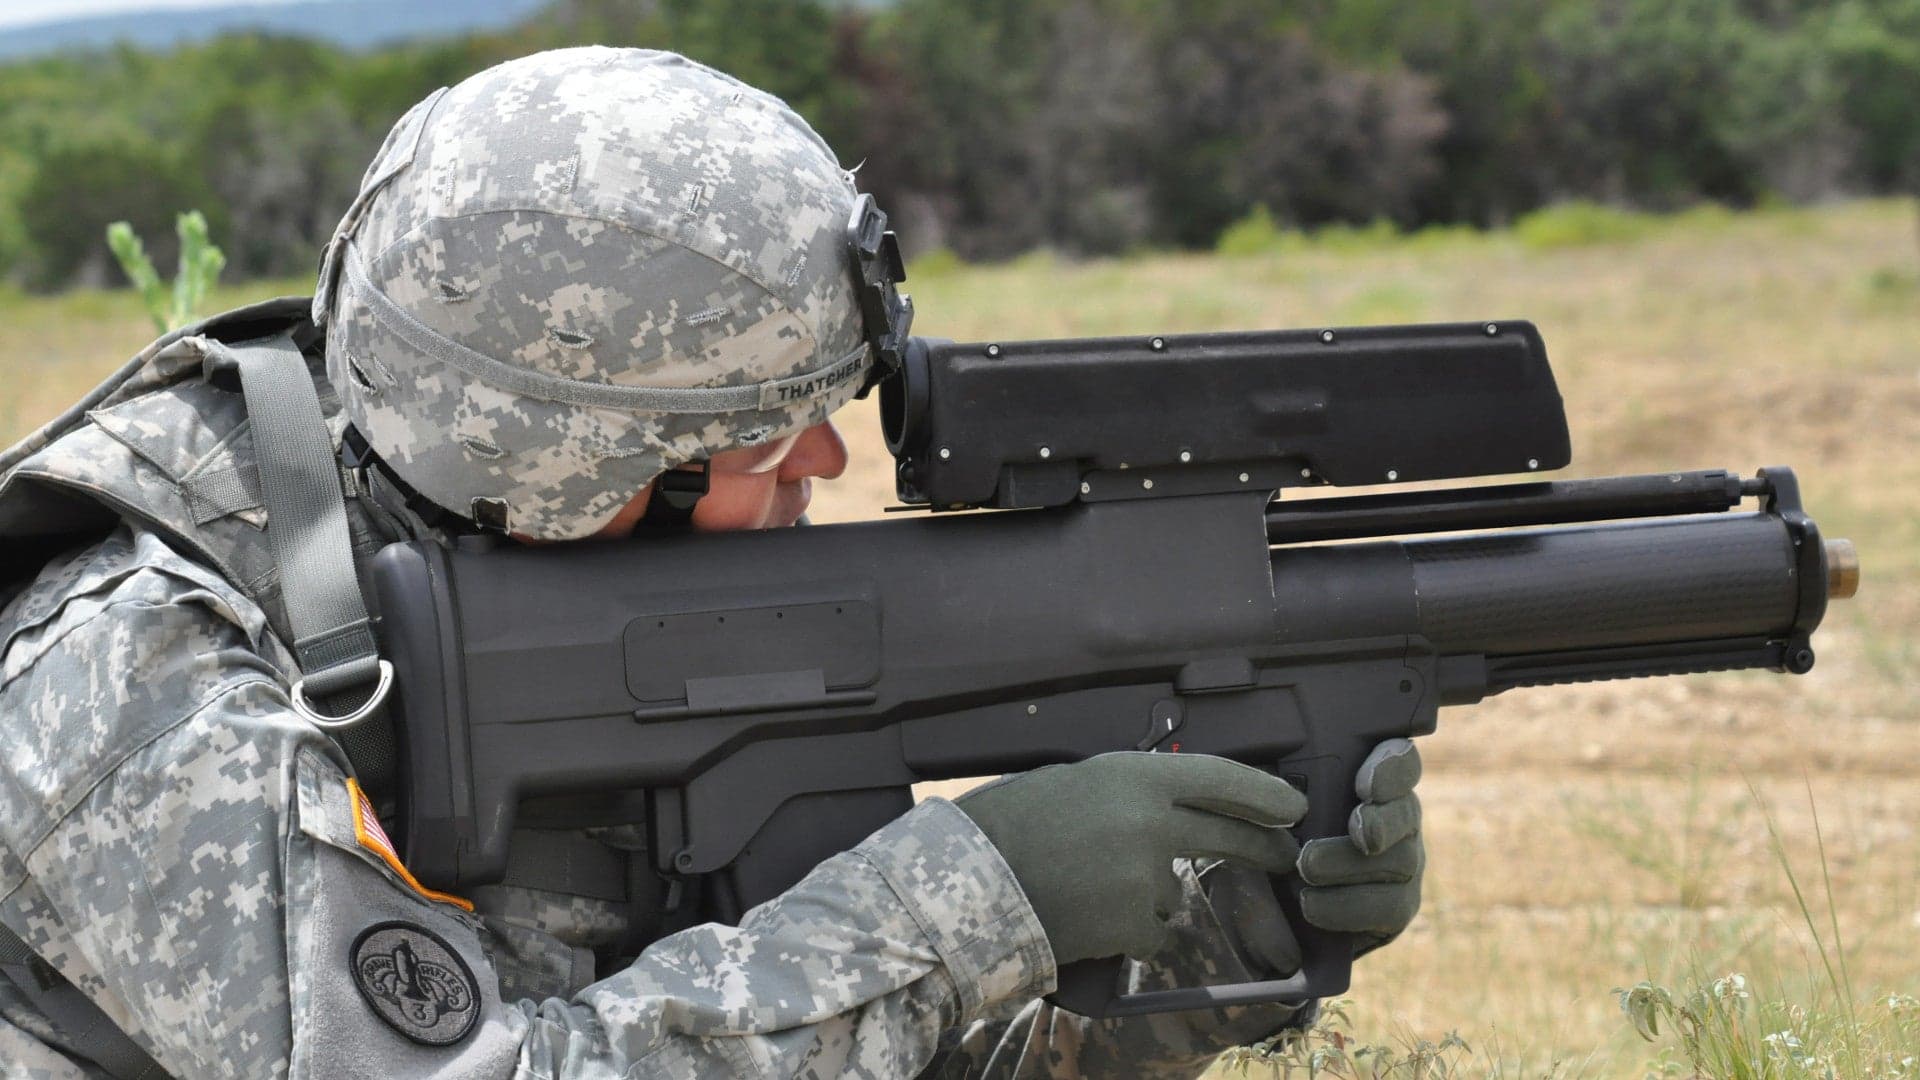 The Army’s Futuristic ‘Punisher’ Grenade Launcher Is Officially Dead, But It Could Rise Again